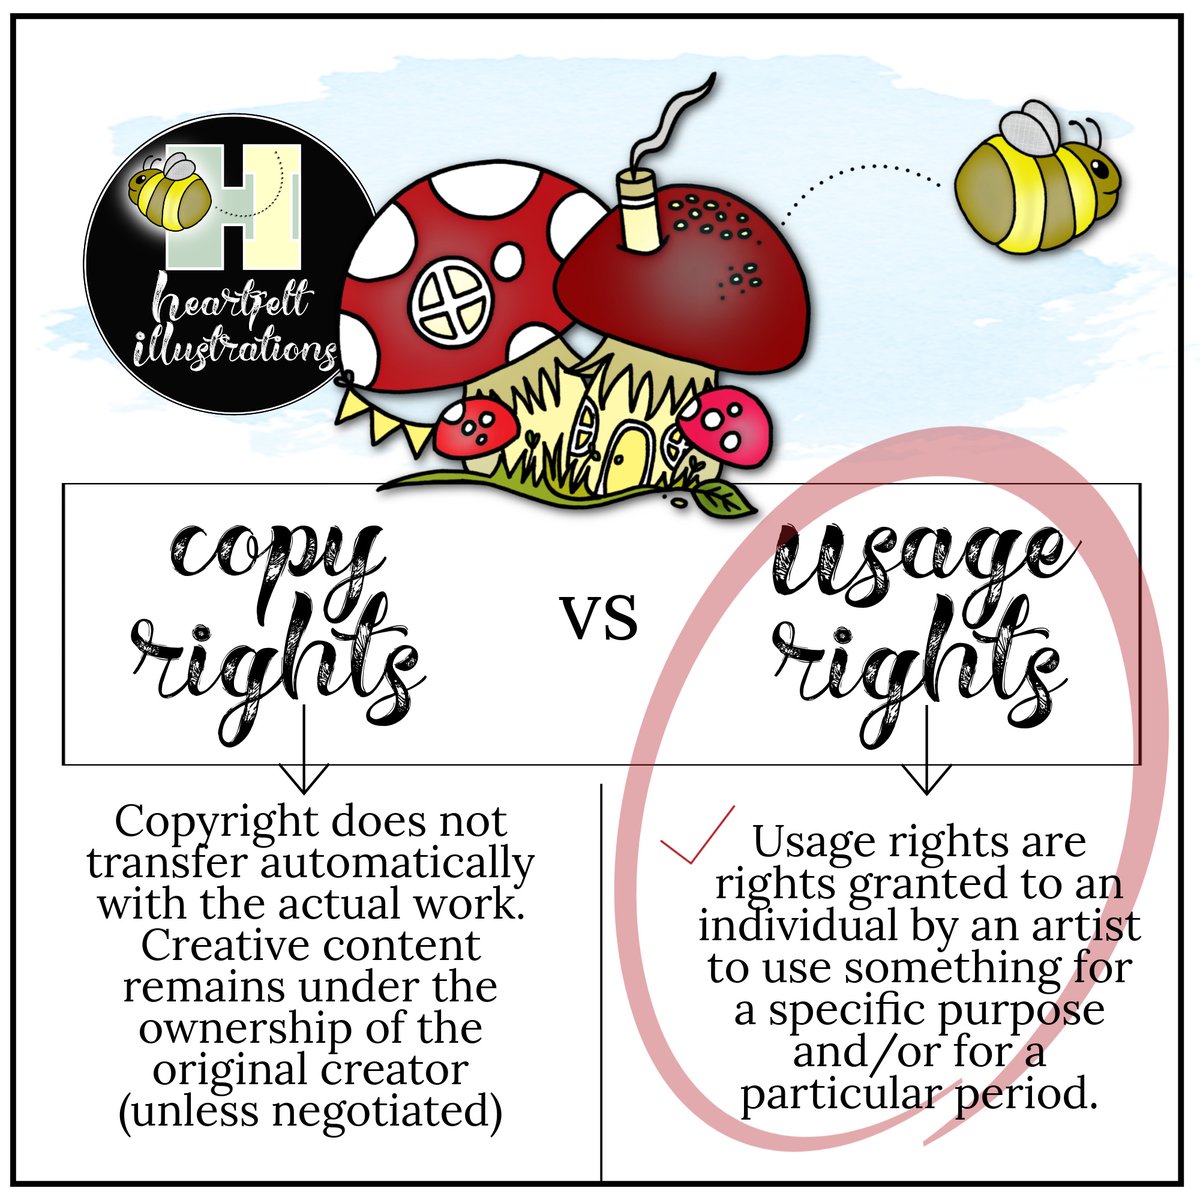 #copyright vs #usagerights 
This is a topic I try and cover periodically as it can unfortunately be misunderstood and confusion can and does occur. In the humblest of ways I am again stating for the record that any works created by myself are recognised as my work in perpetuity.